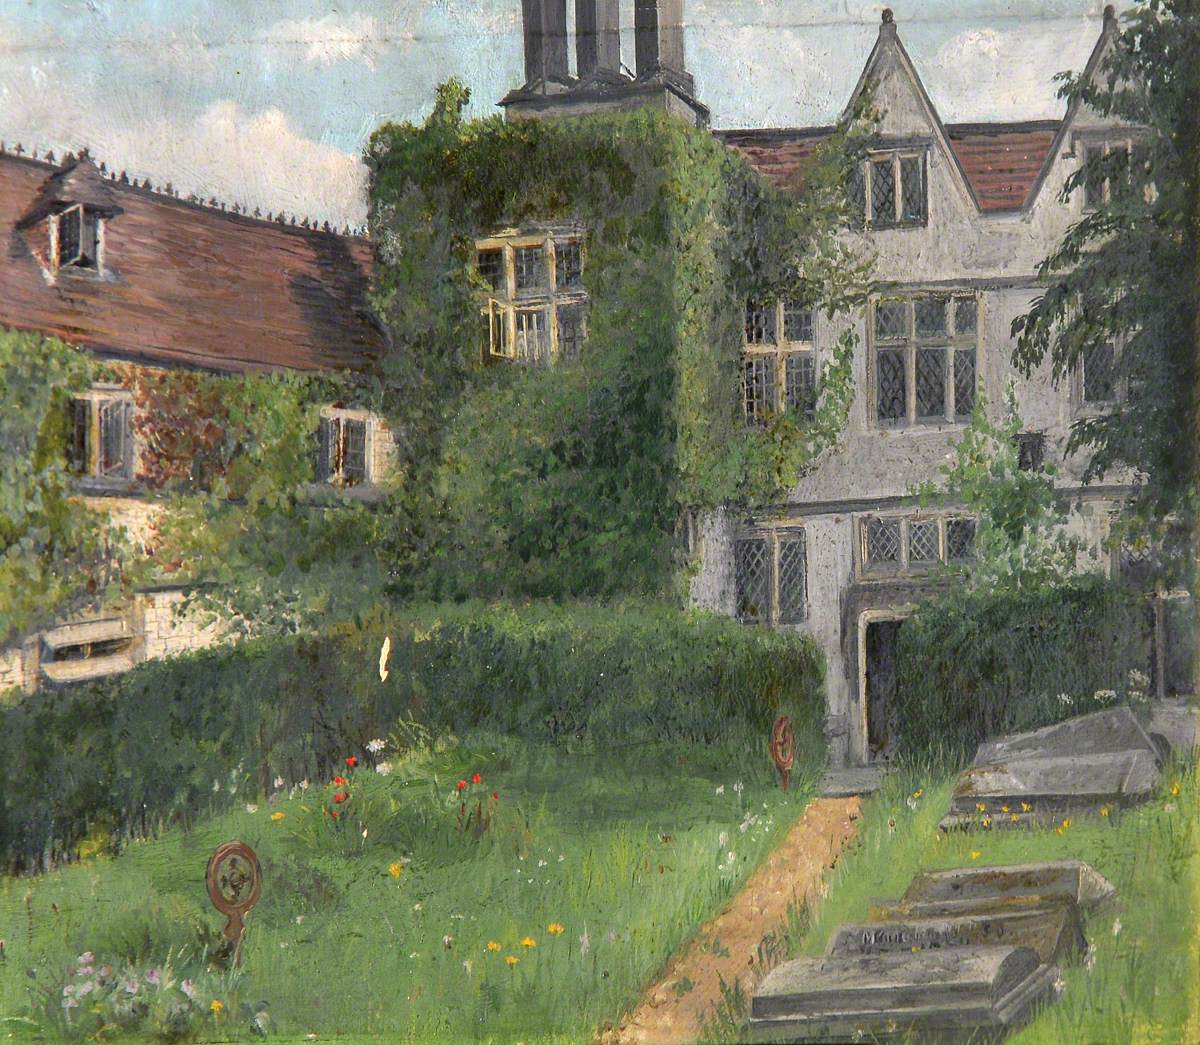 View of the Back of a Tudor House Overlooking a Graveyard